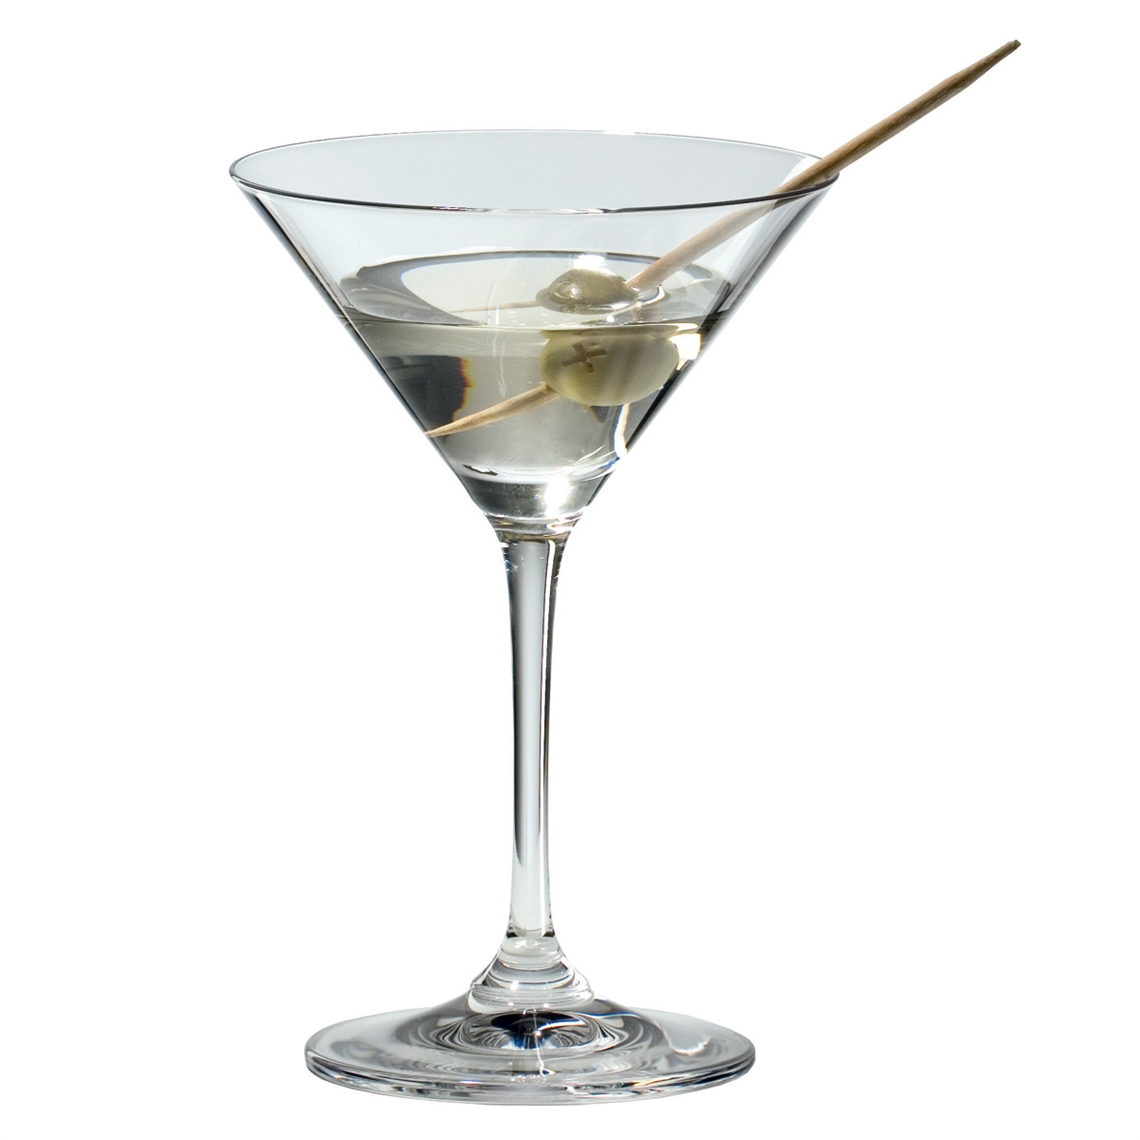 View more gin and tonic glasses from our Martini Glasses range